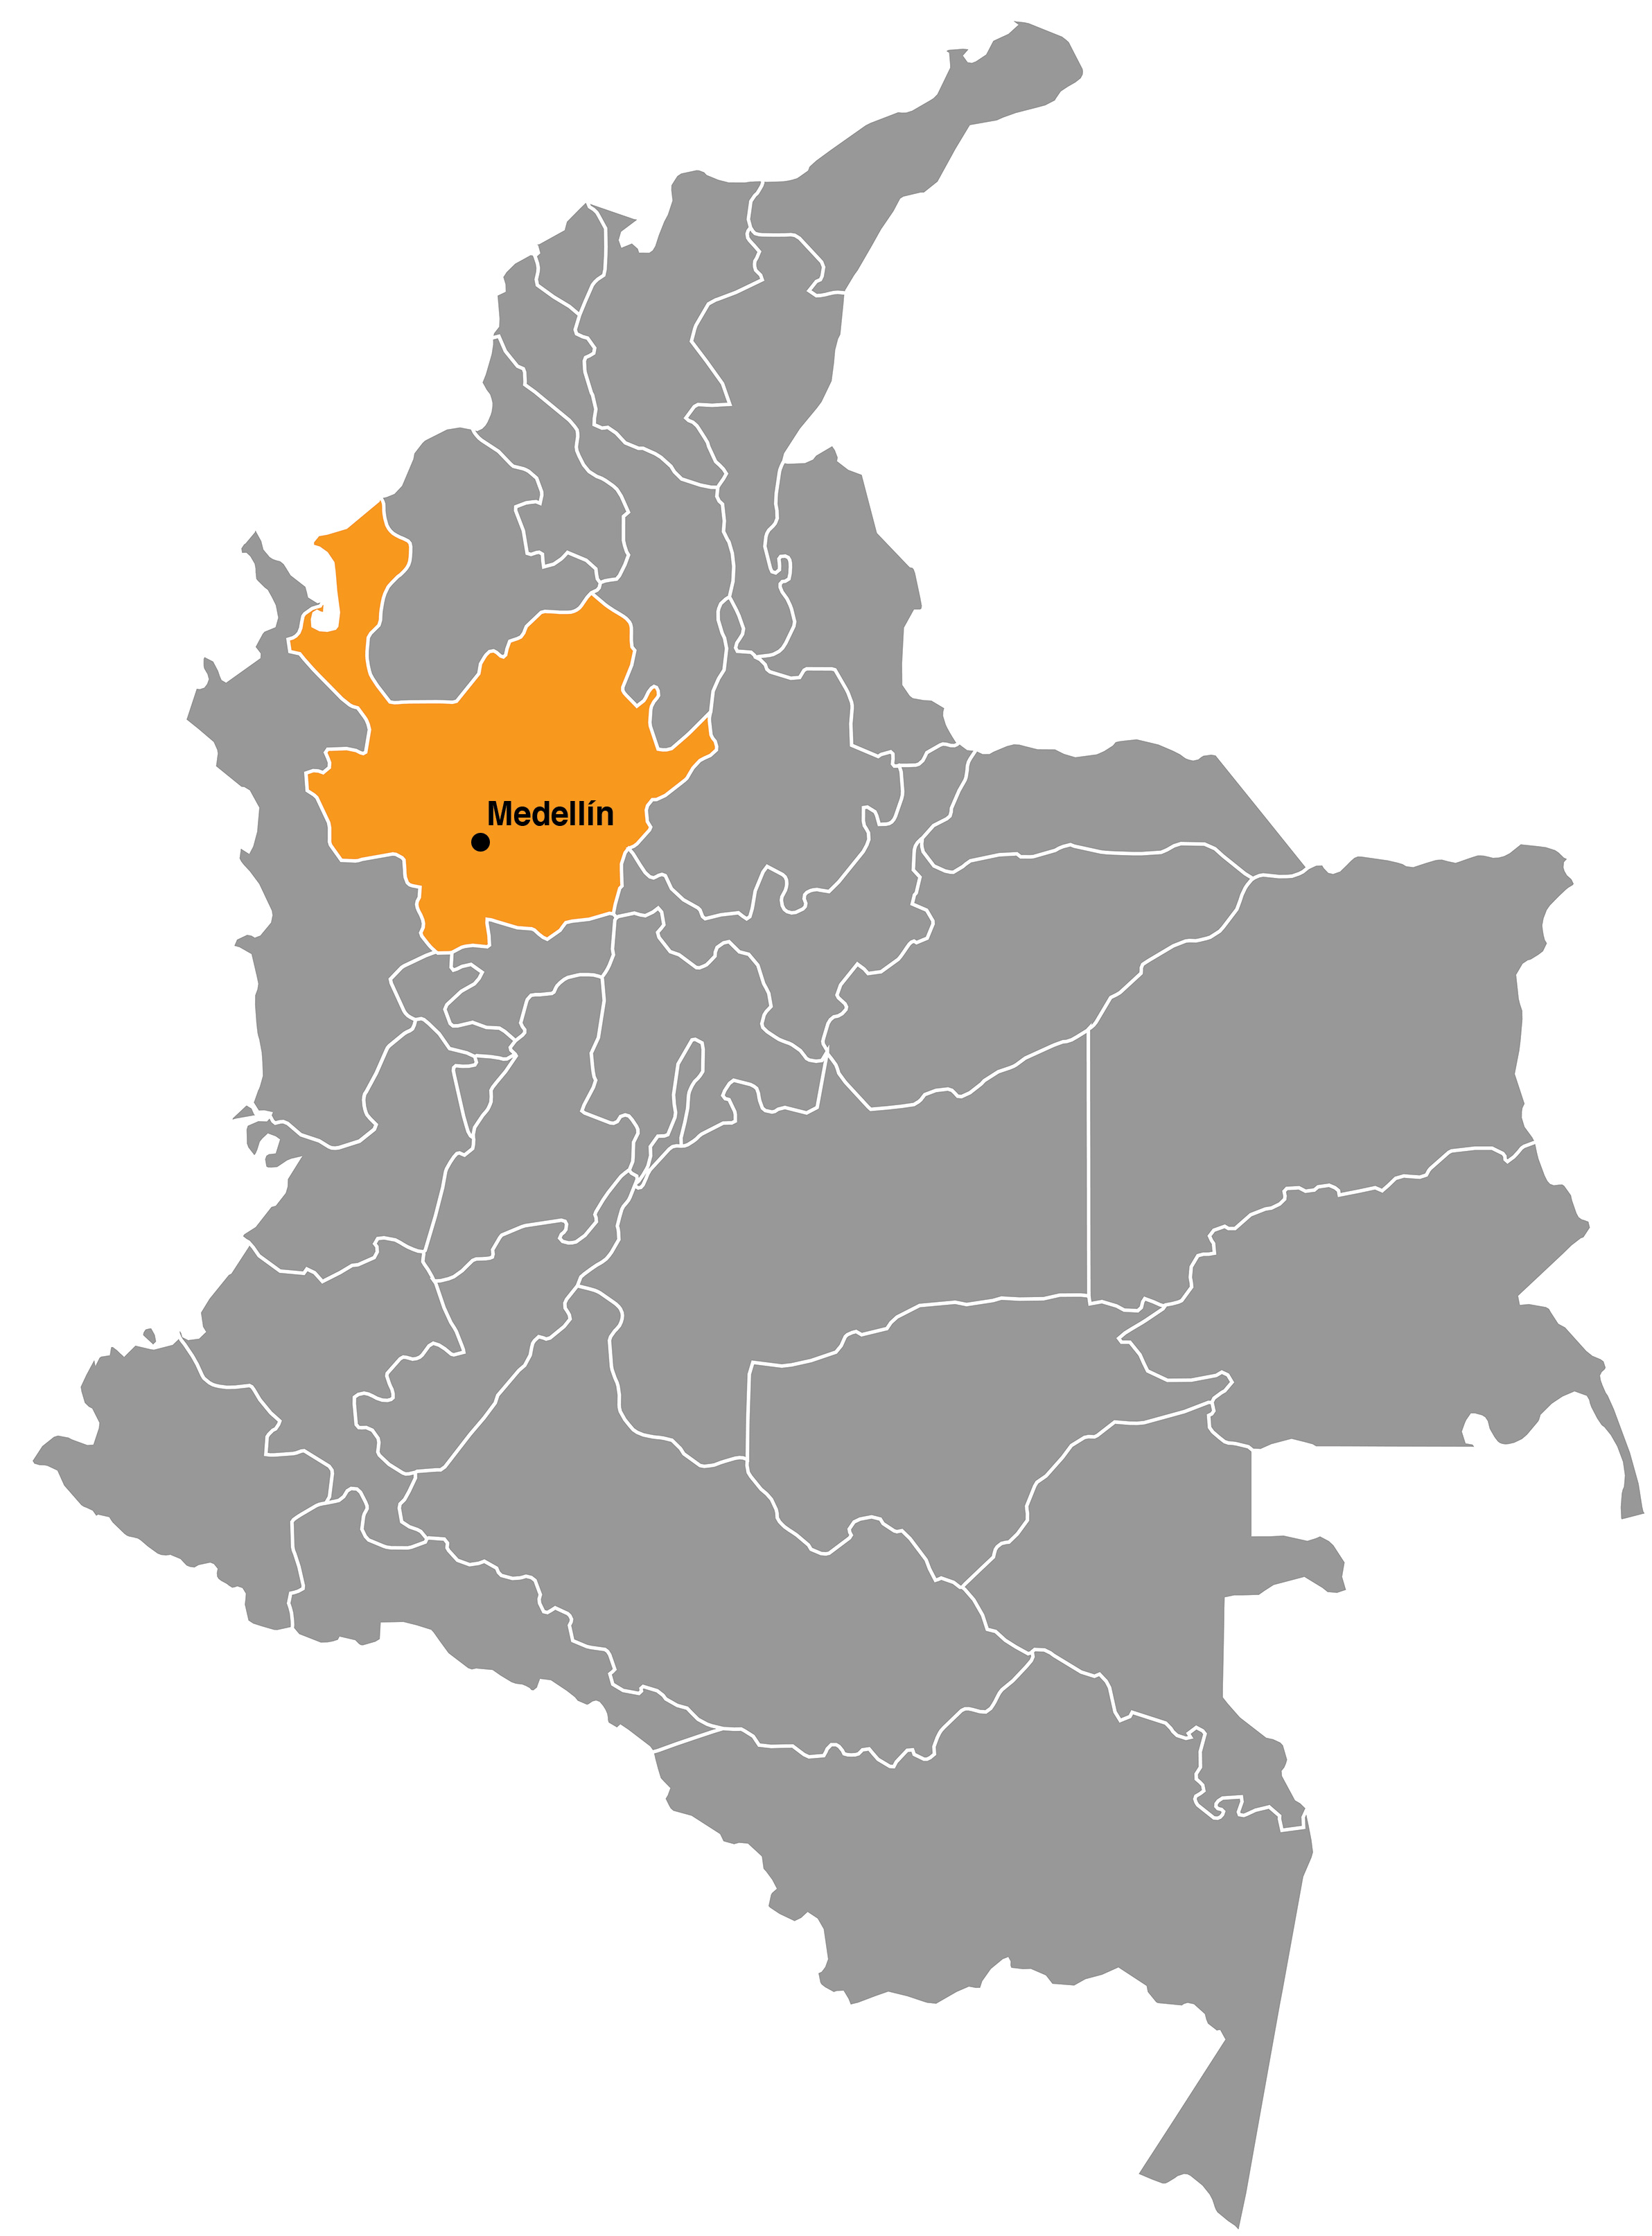 lone_rucksack_colombia_map-2